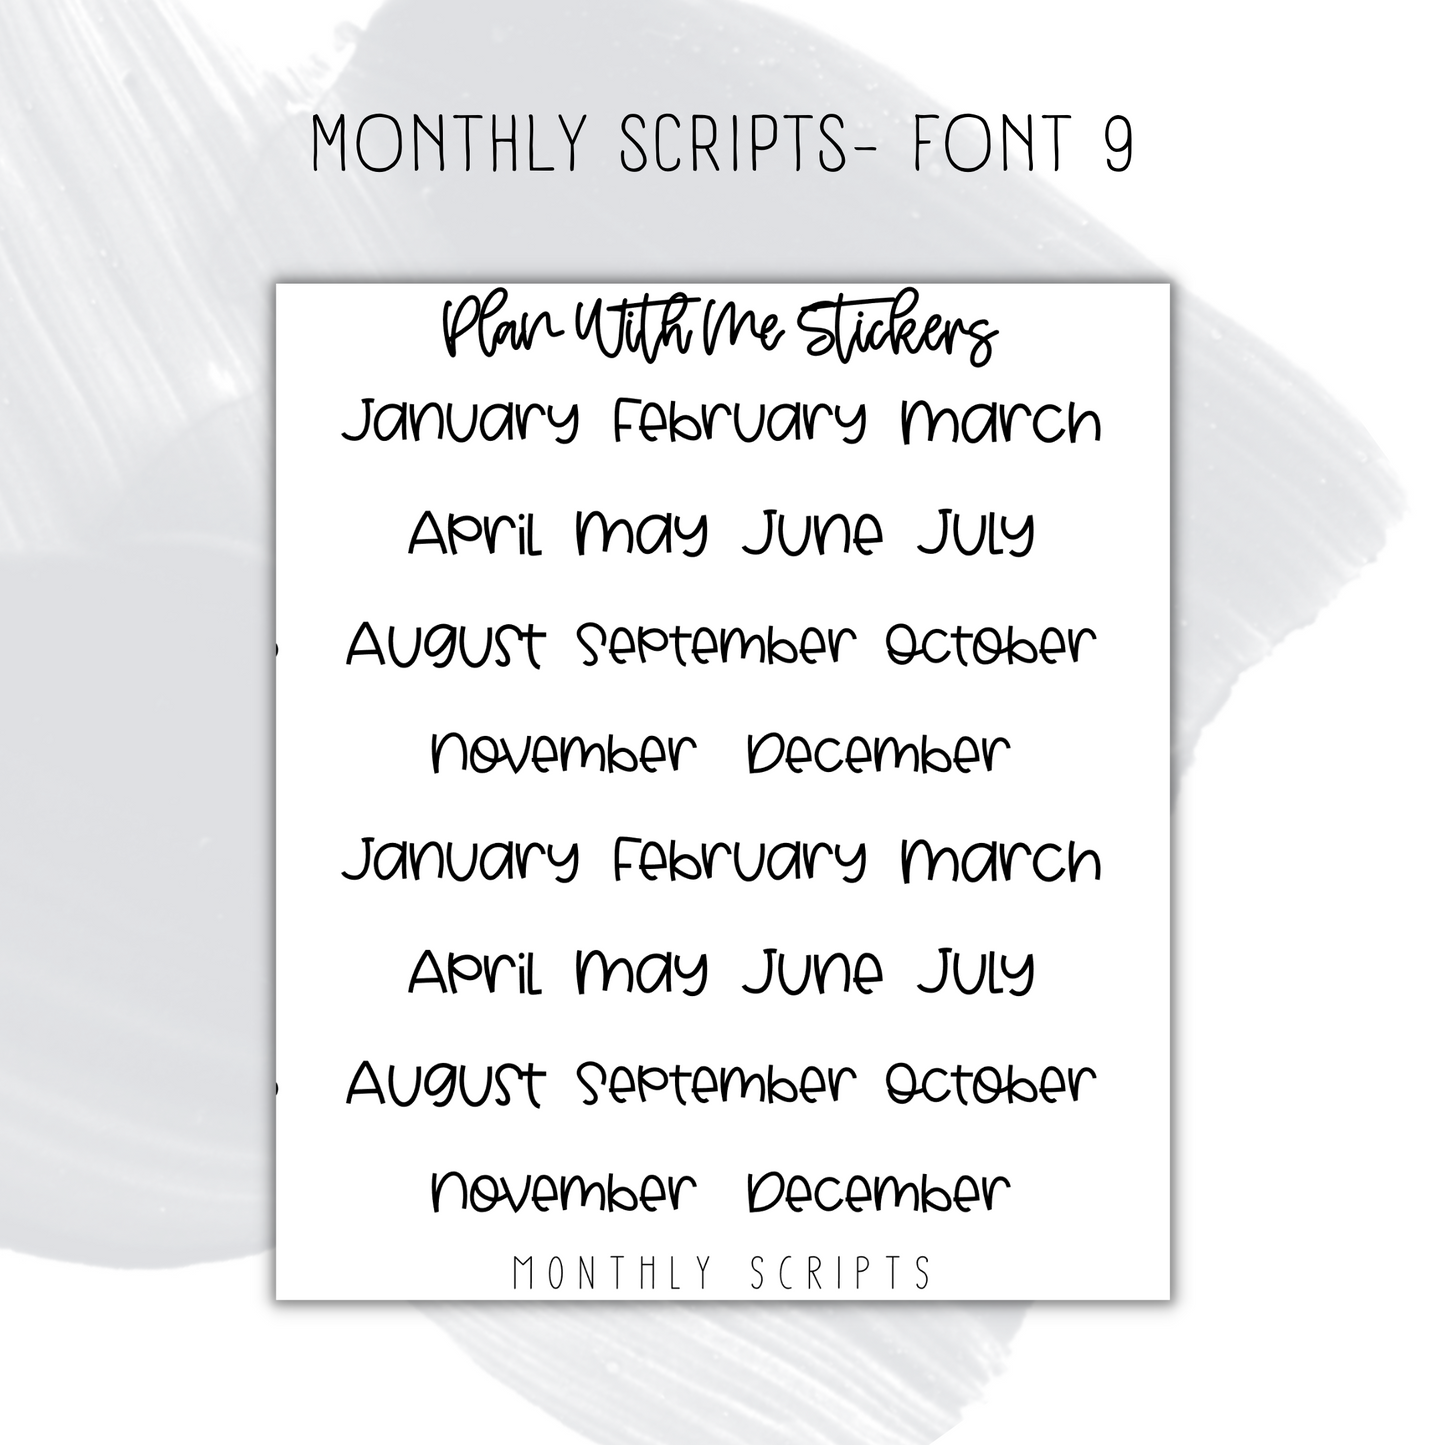 Monthly Scripts- Font 9